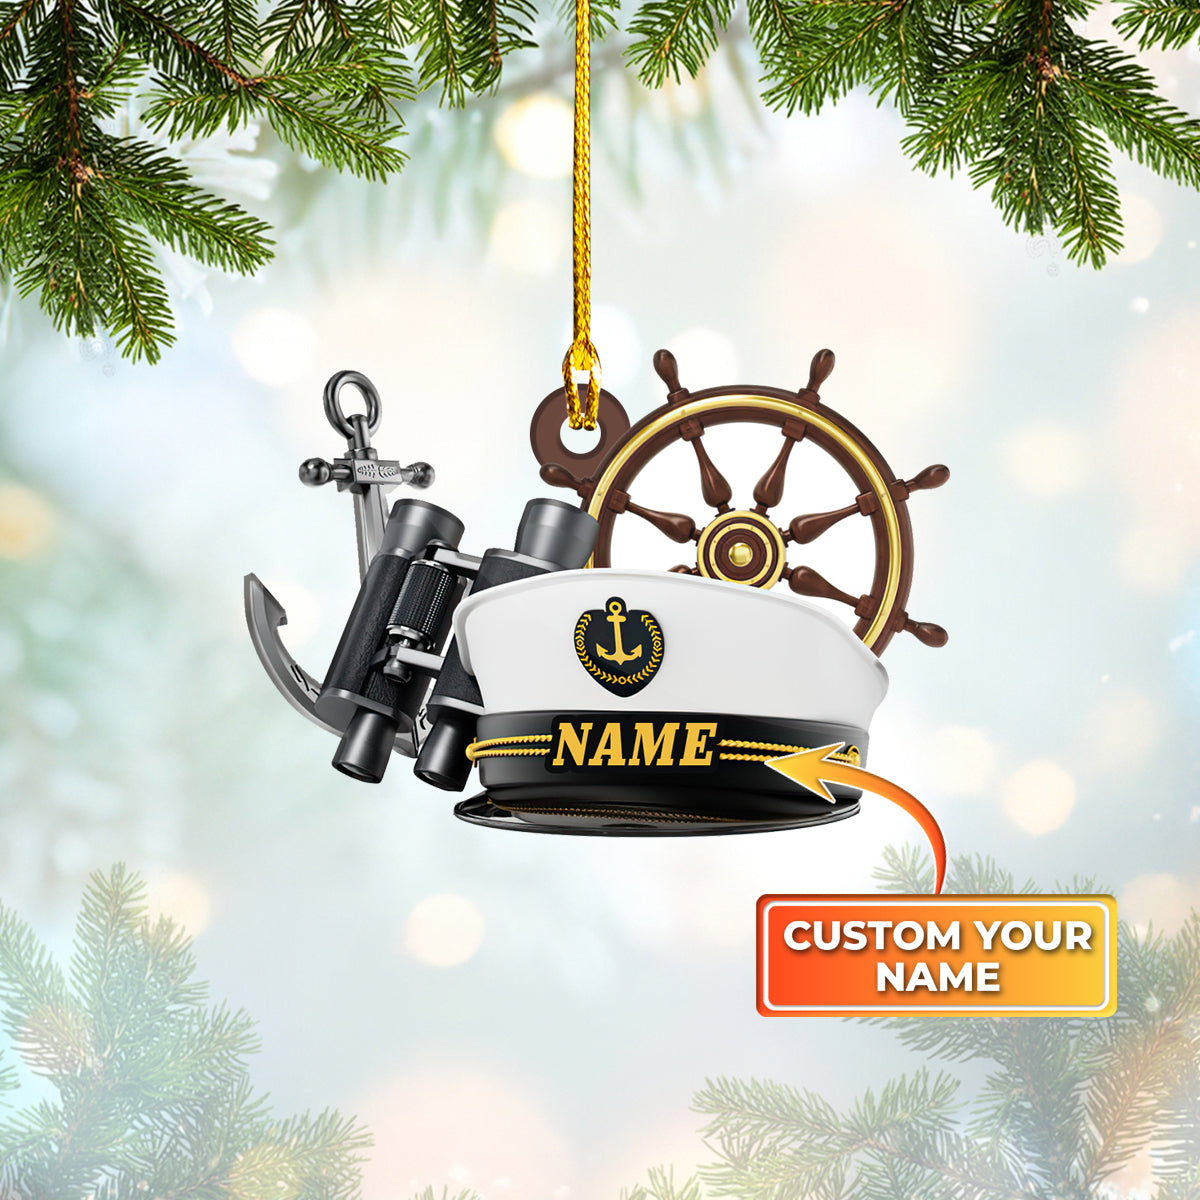 Personalized Name Sailor Captain Custom Shaped Ornament/ Gift for Sailor Captain